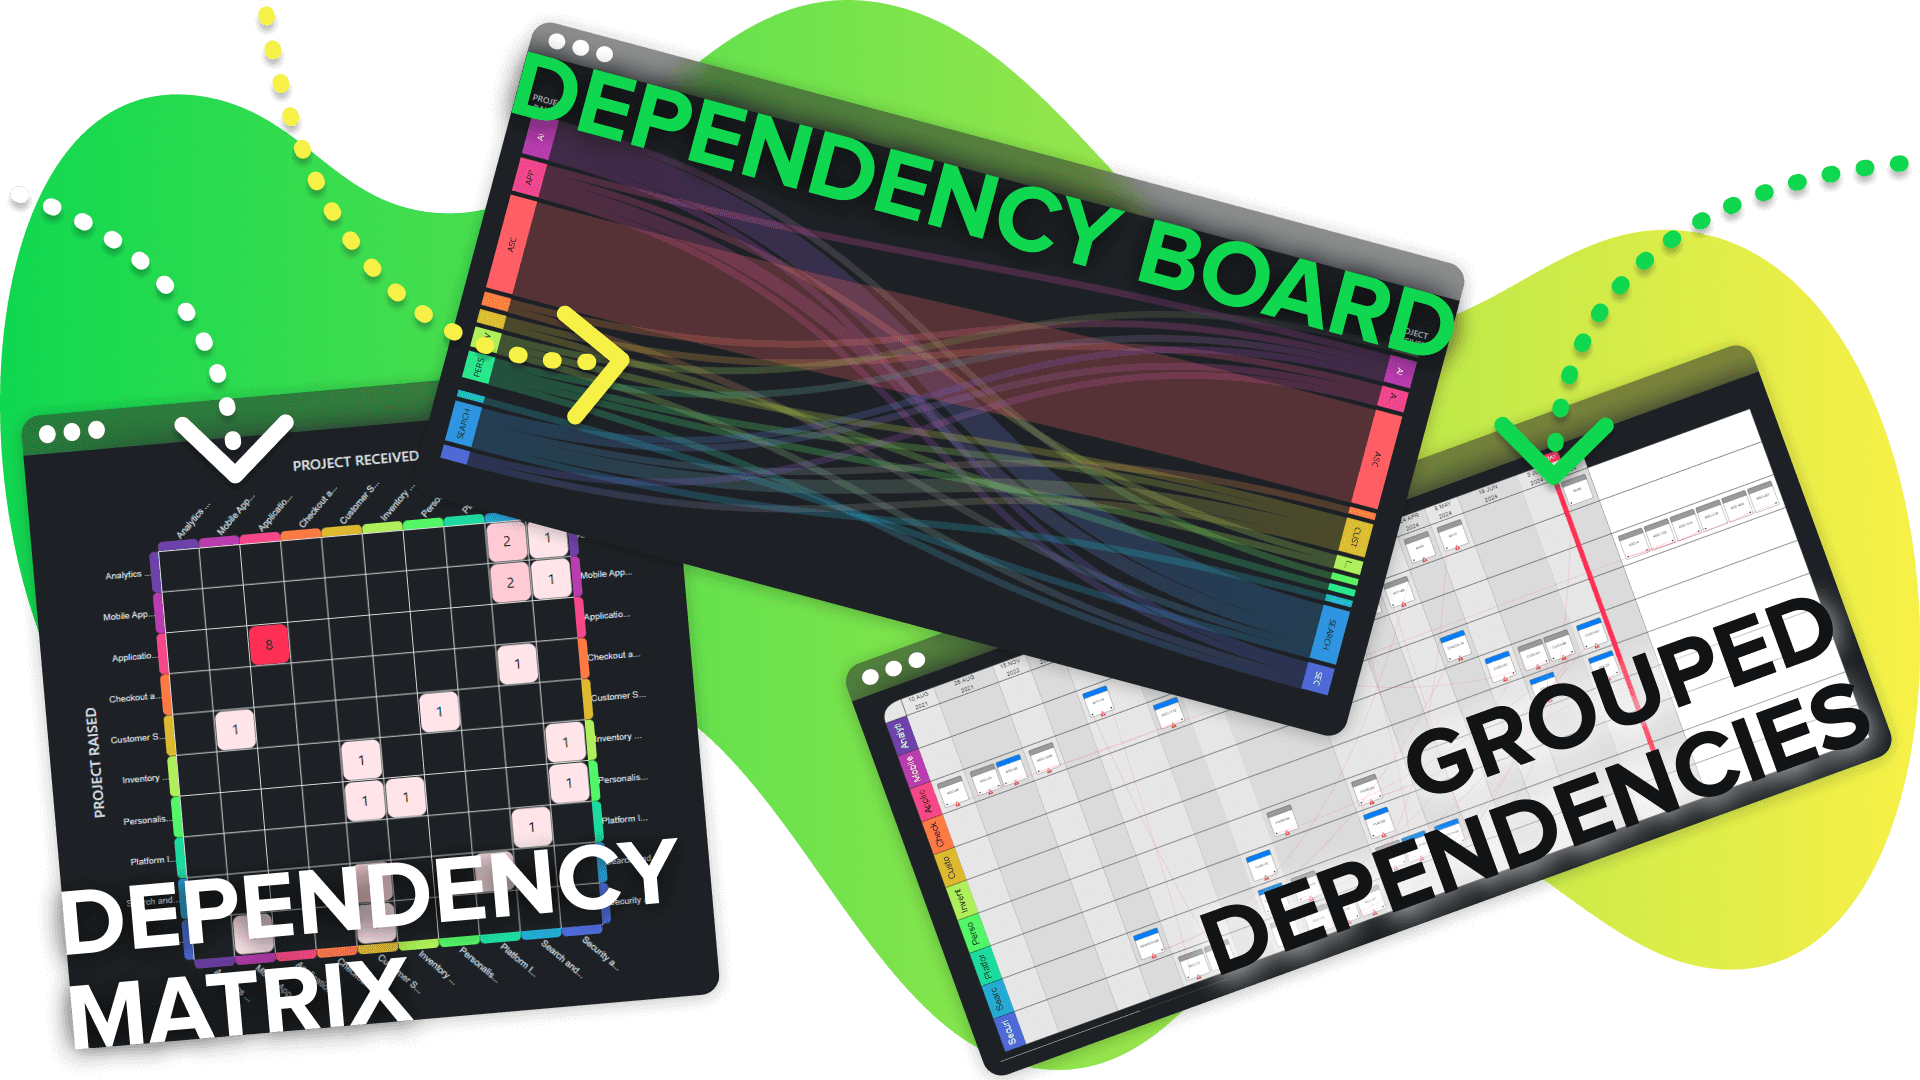 3 different diagrams, arranged diagonally and overlapping, depicting the Dependency Matrix, the Dependency Board, and Grouped Dependencies from Dependency Mapper